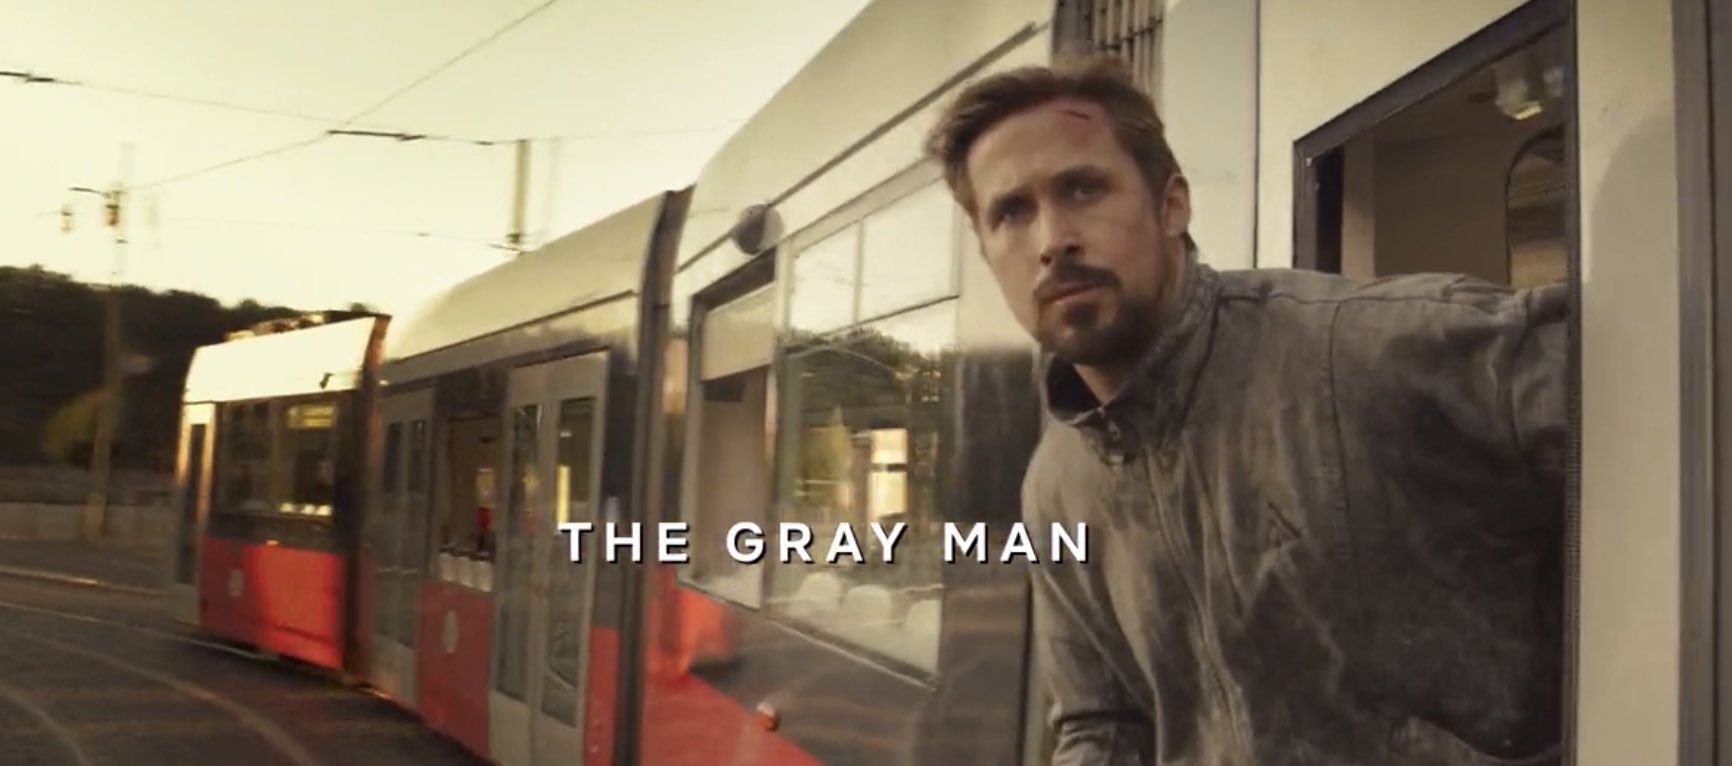 The Gray Man' Directors Explain How They Wrangled the Cast